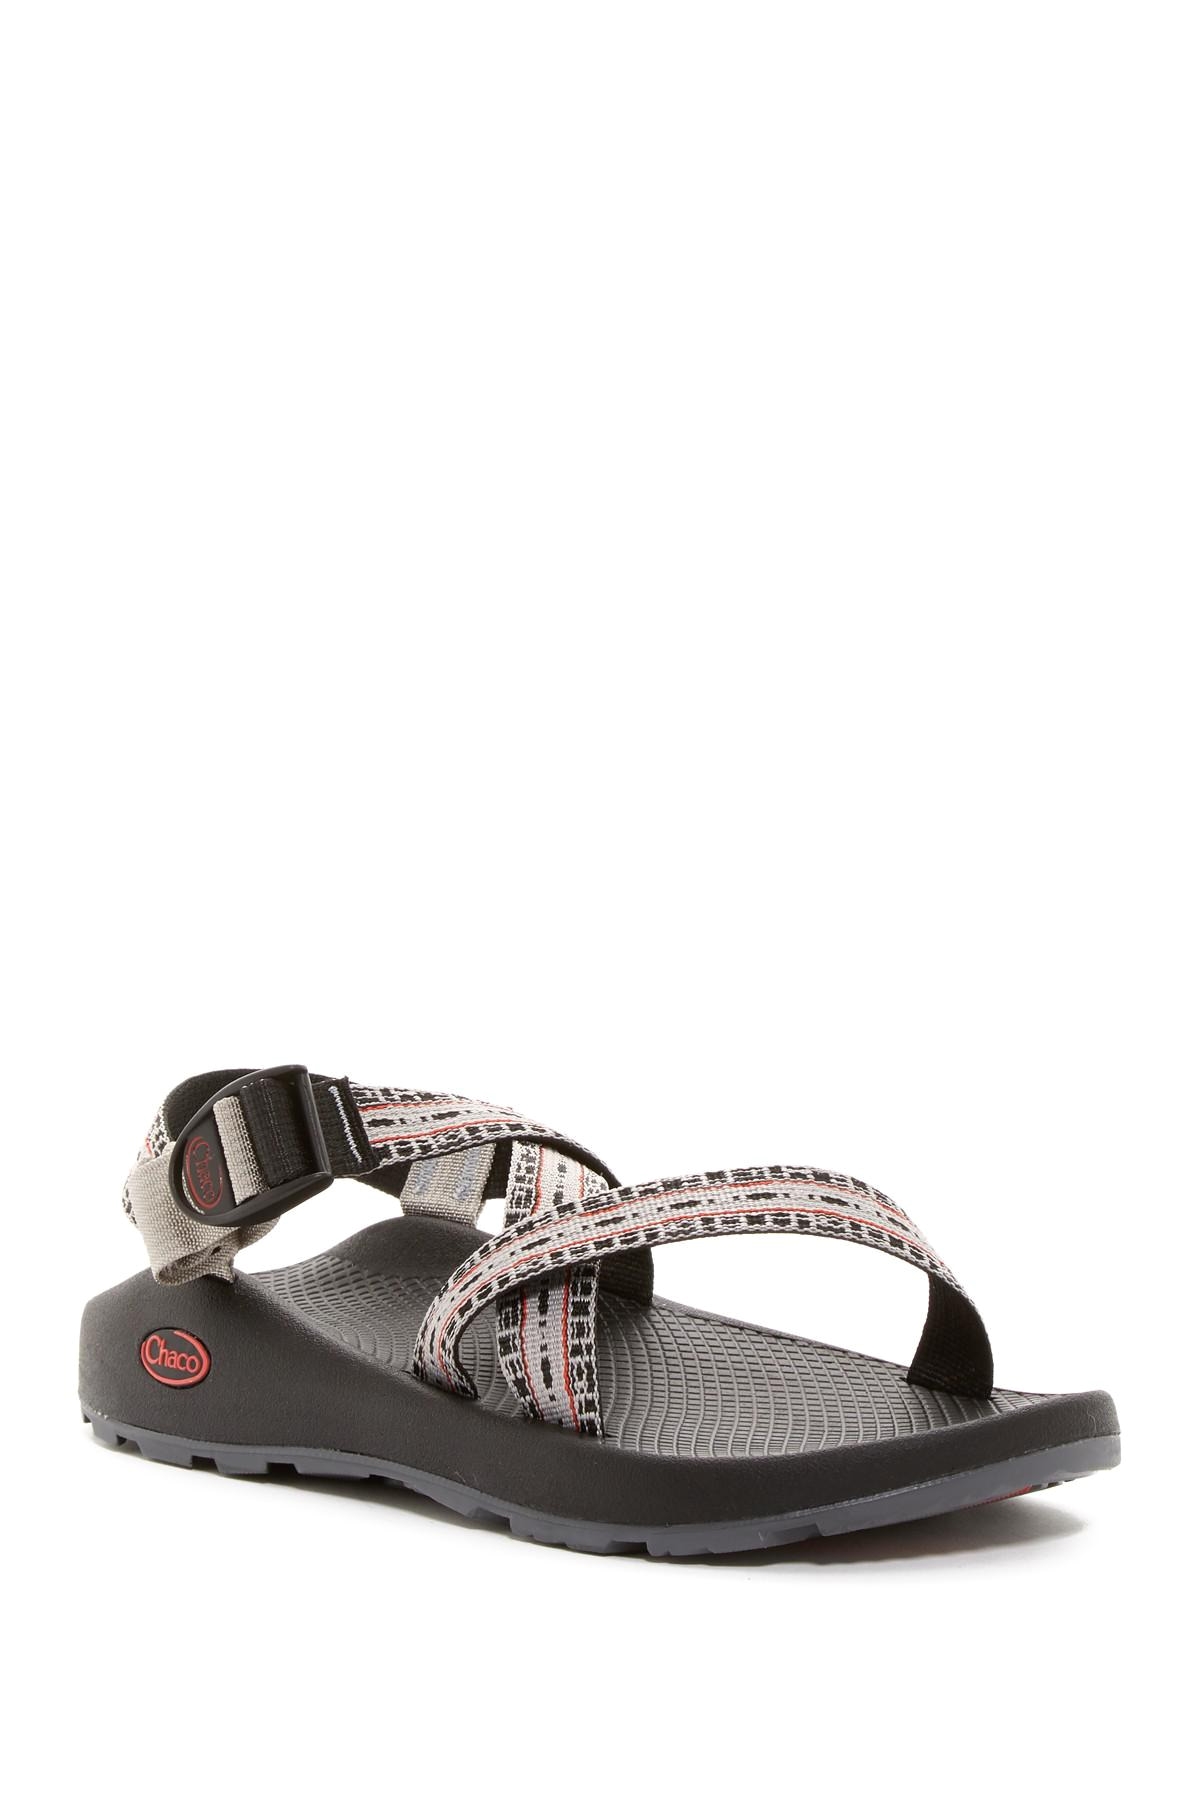 nordstrom rack fitflop elegant lyst chaco z1 classic strappy sandal of elegant nordstrom rack fitflop beautiful